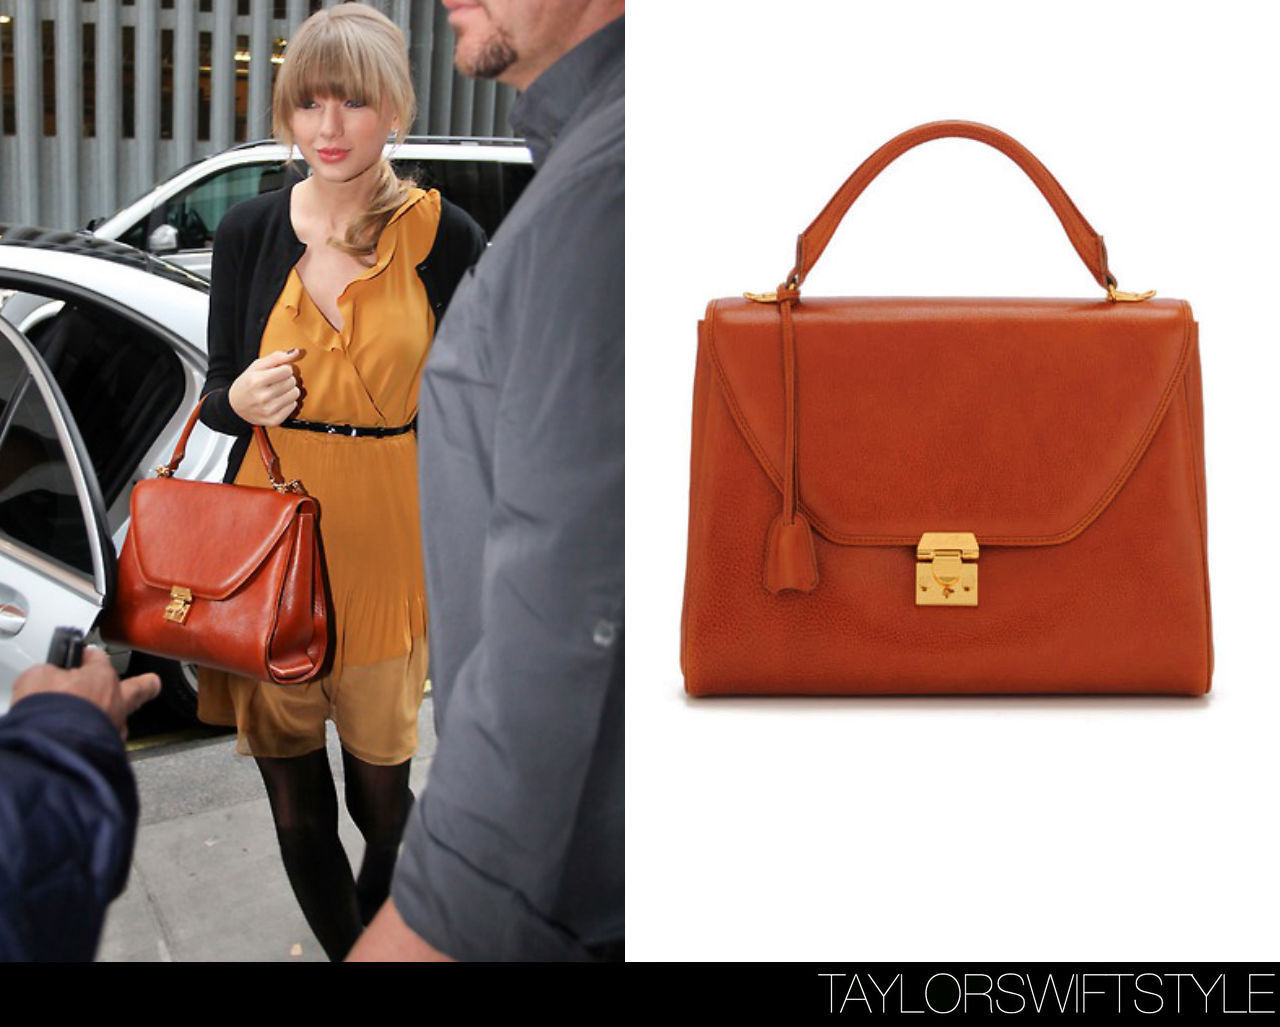 Leaving KISS 100 Radio studios | London, England | February 21, 2013Mark Cross ‘Scottie Large Flap Satchel’ - $2350.00Worn with: Christian Louboutin pumpsView the numerous times Taylor has sported this Mark Cross satchel here.